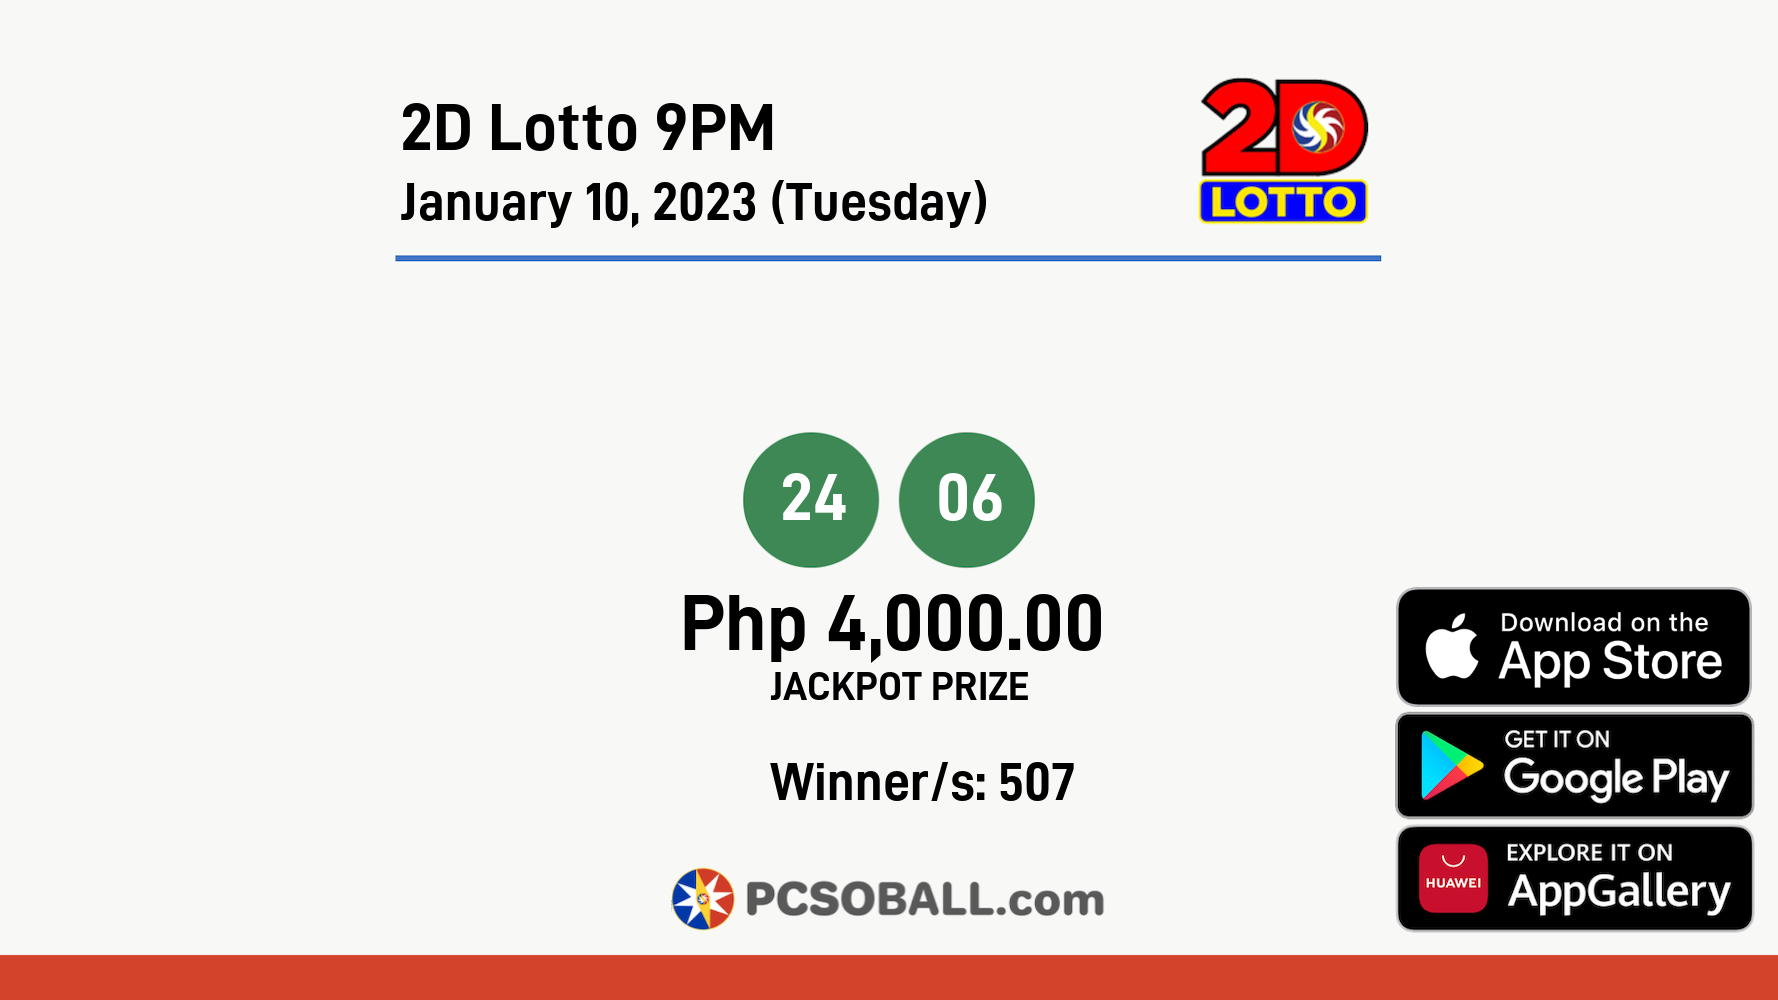 2D Lotto 9PM January 10, 2023 (Tuesday) Result